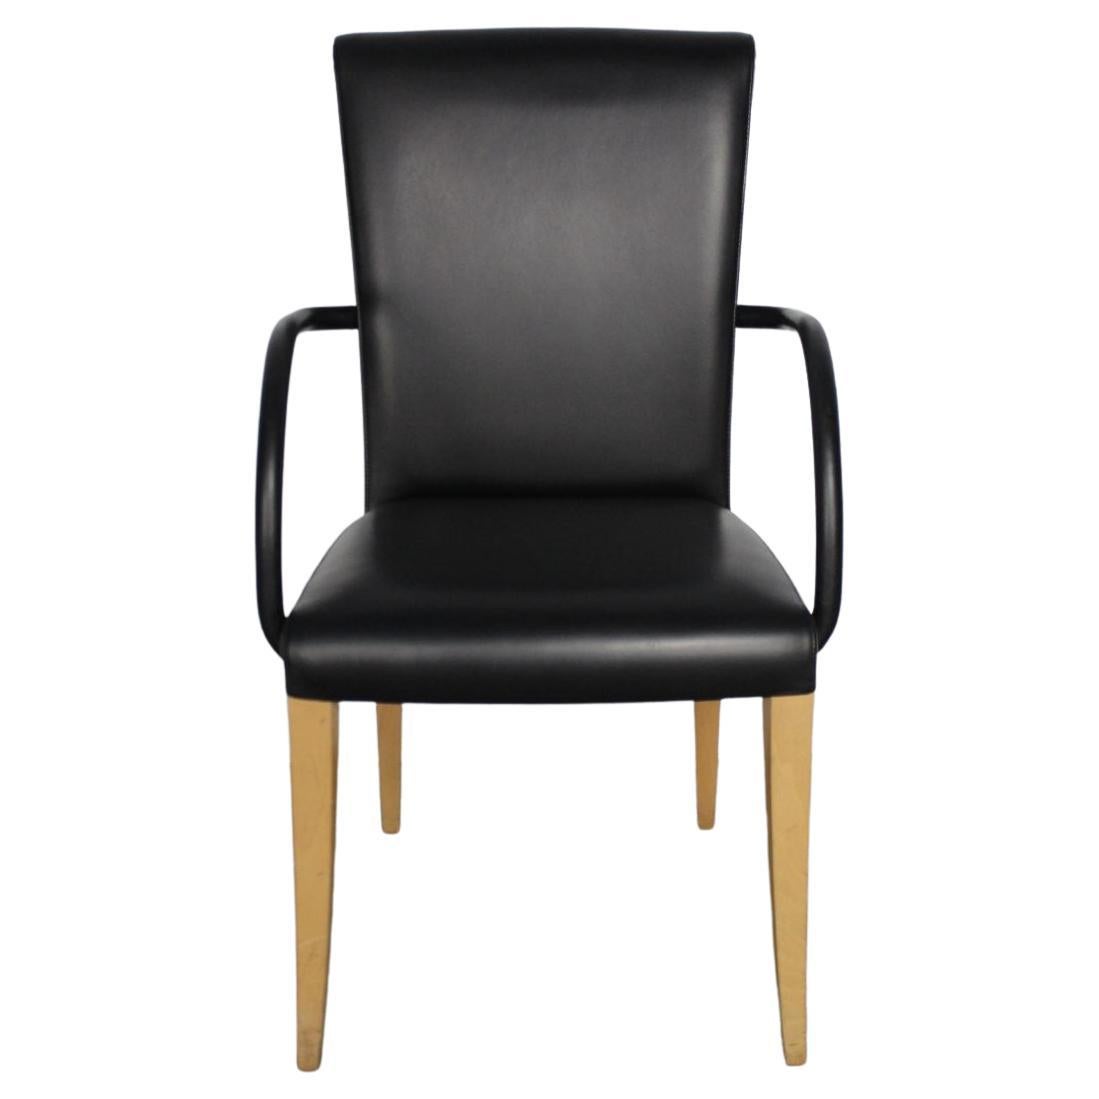 Superb Suite of 12 Poltrona Frau “Vittoria” Dining Chairs in Black “Pelle Frau” For Sale